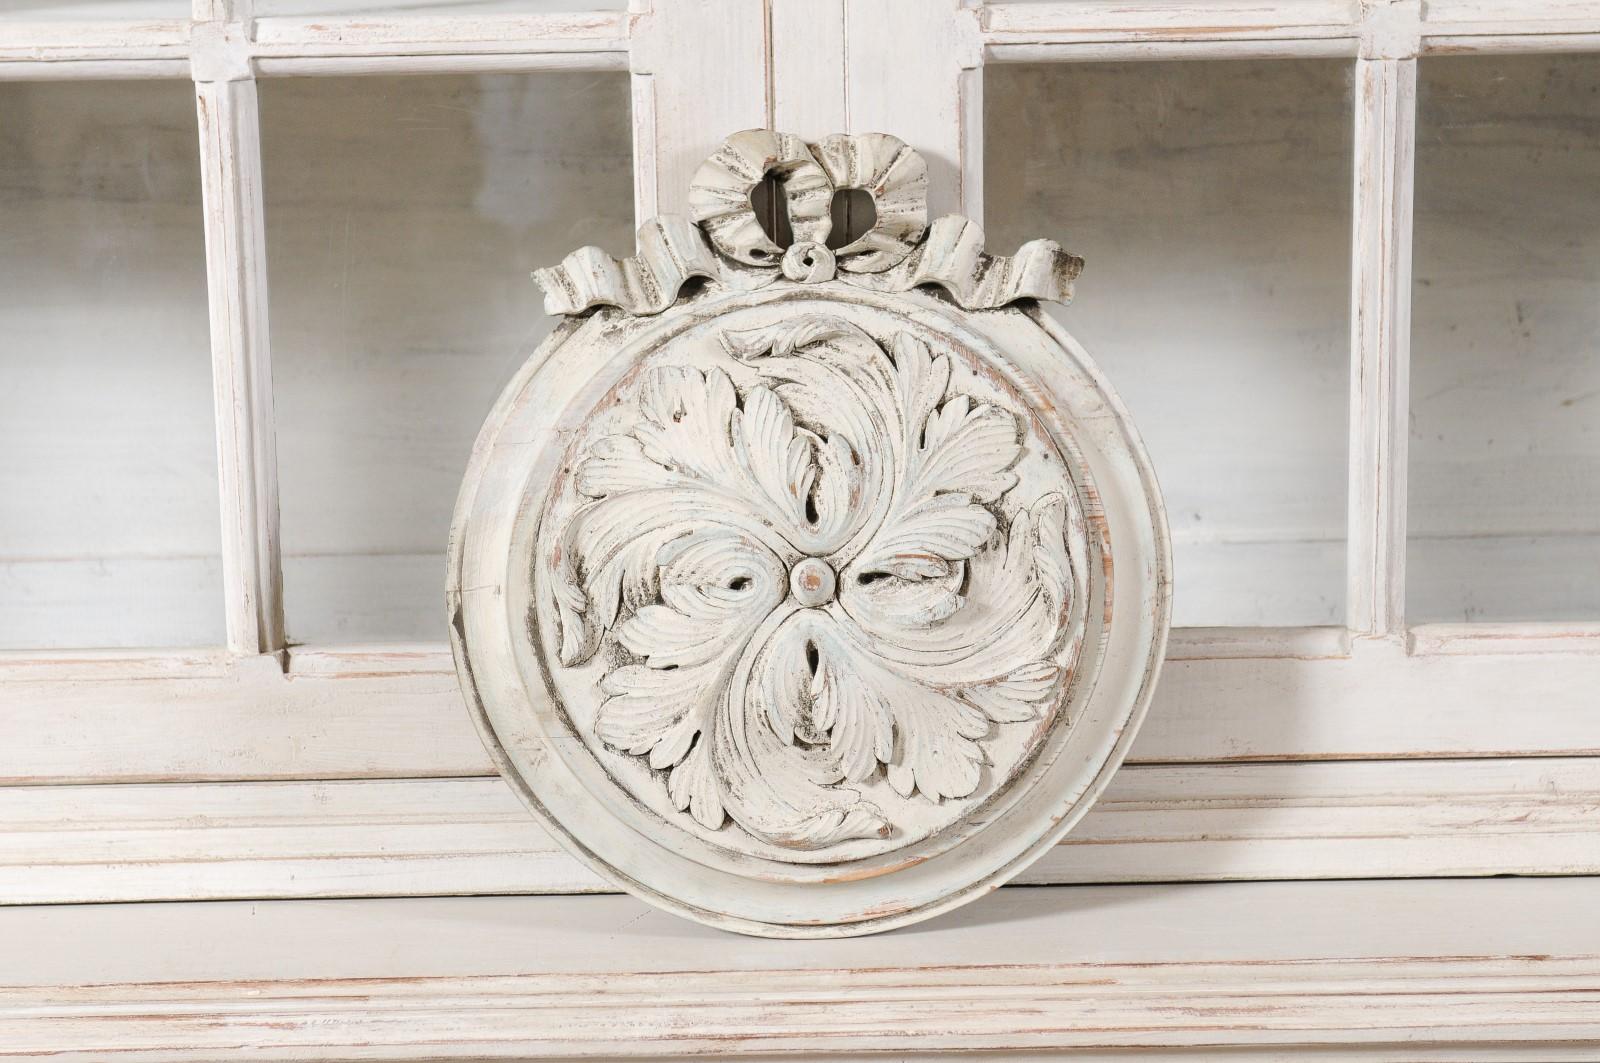 A French painted and carved wooden medallion from the 19th century, with low-relief acanthus leaves and ribbon motifs. Created in France during the 19th century, this lovely medallion features swirling acanthus leaves carved in low-relief, topped